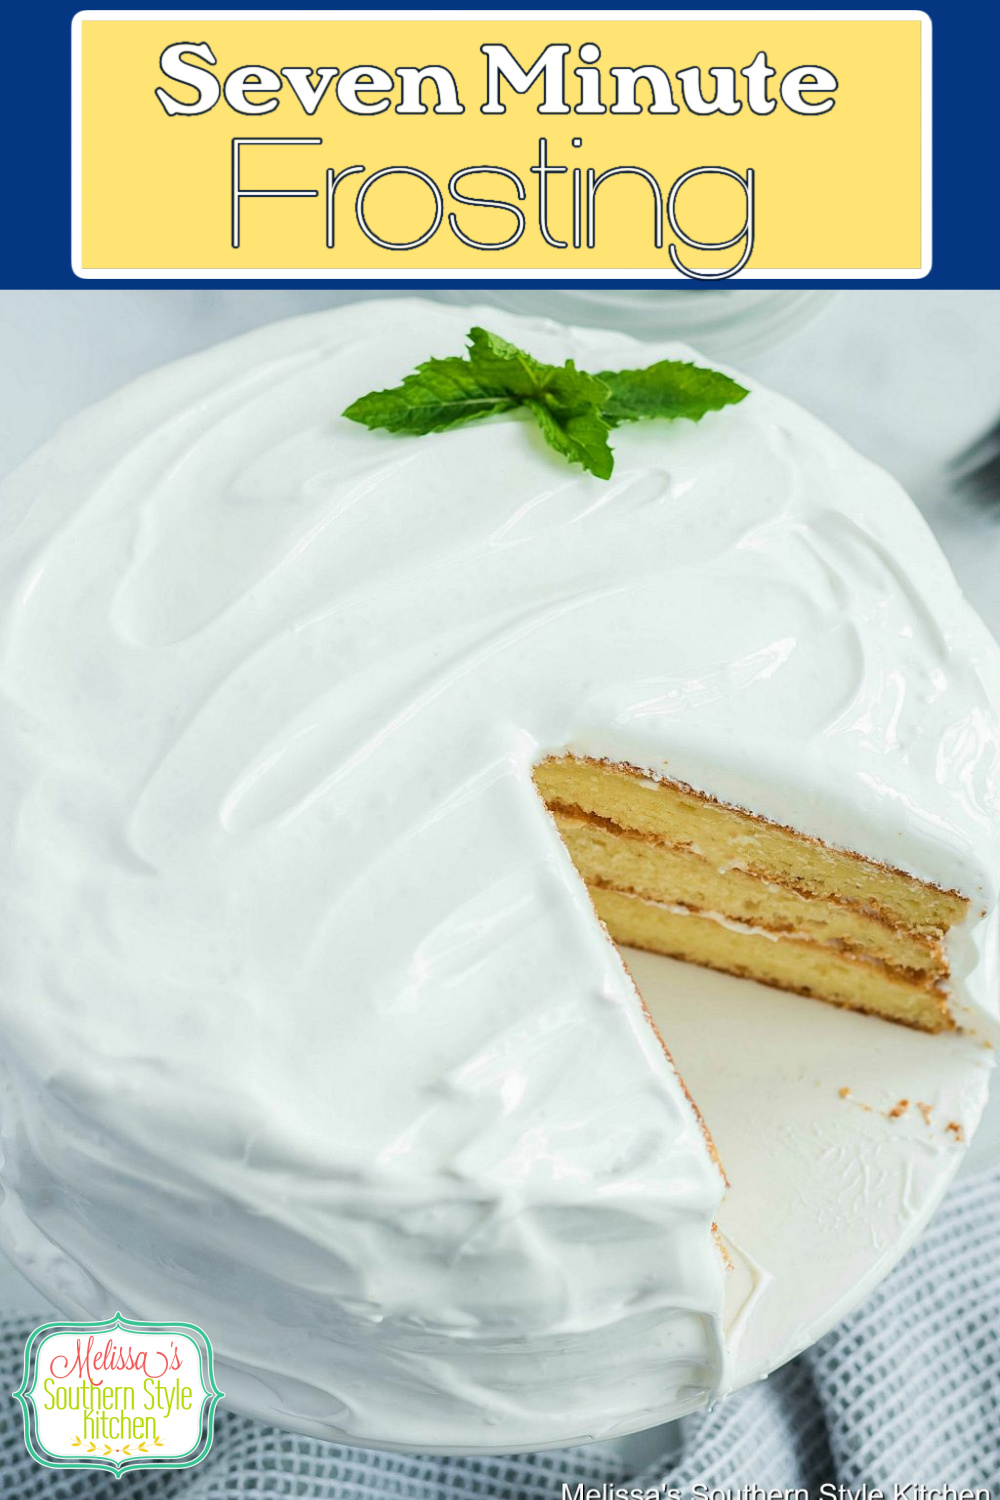 This light and billowy 7-Minute Frosting is certain to make it a delectable frosting recipe you'll reach for again and again. #sevenminutefrosting #7minutefrosting #meringue #fluffywhitefrosting #cakefrostingrecipes #icing #marshmallowfrosting #desserts #dessertfoodrecipes #southernfood #southernrecipes